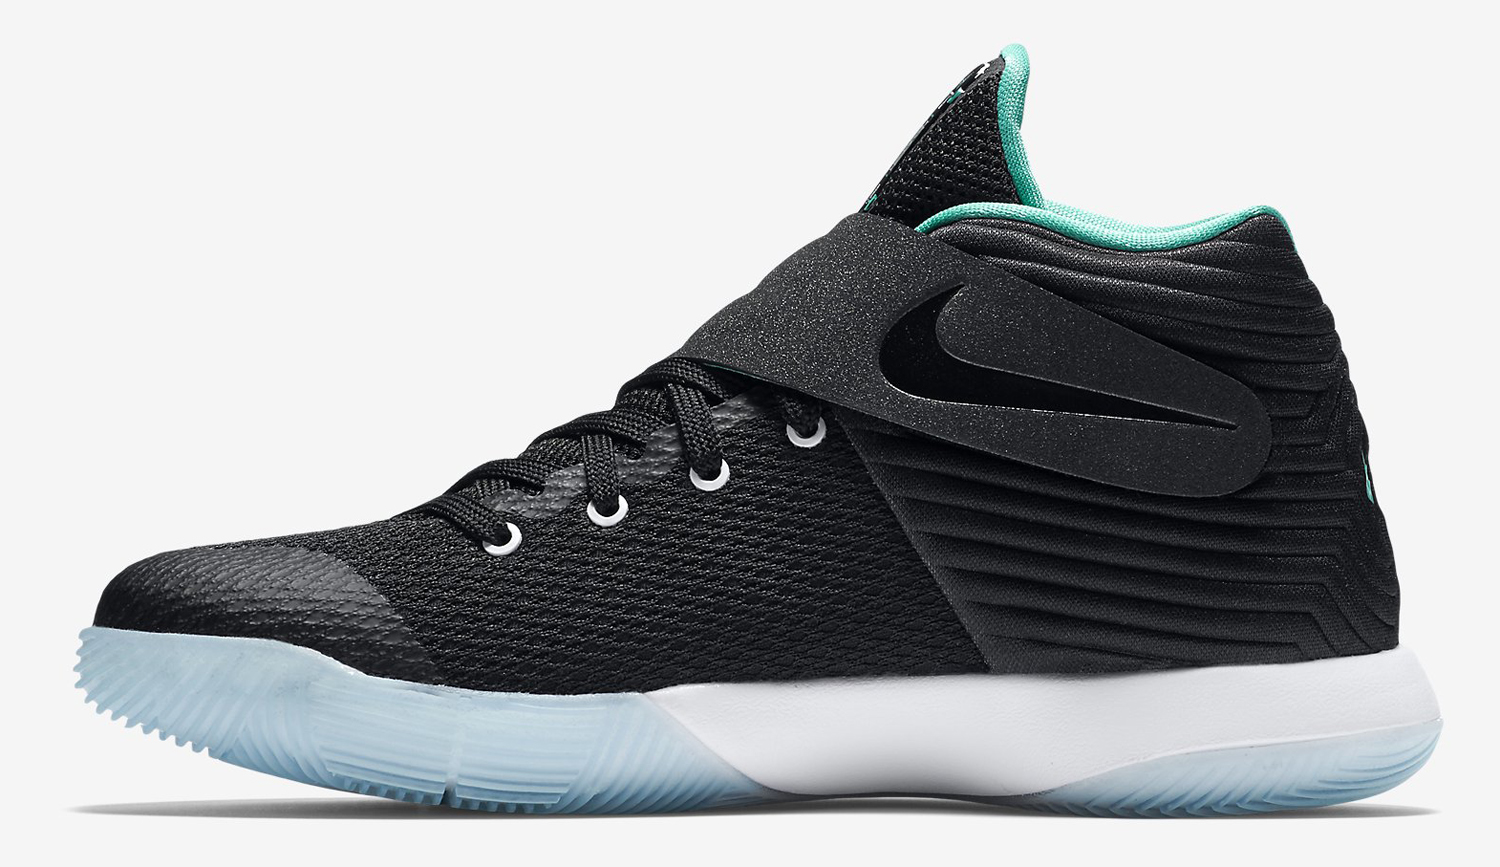 Nike Made Kyrie Irving Shoes for 